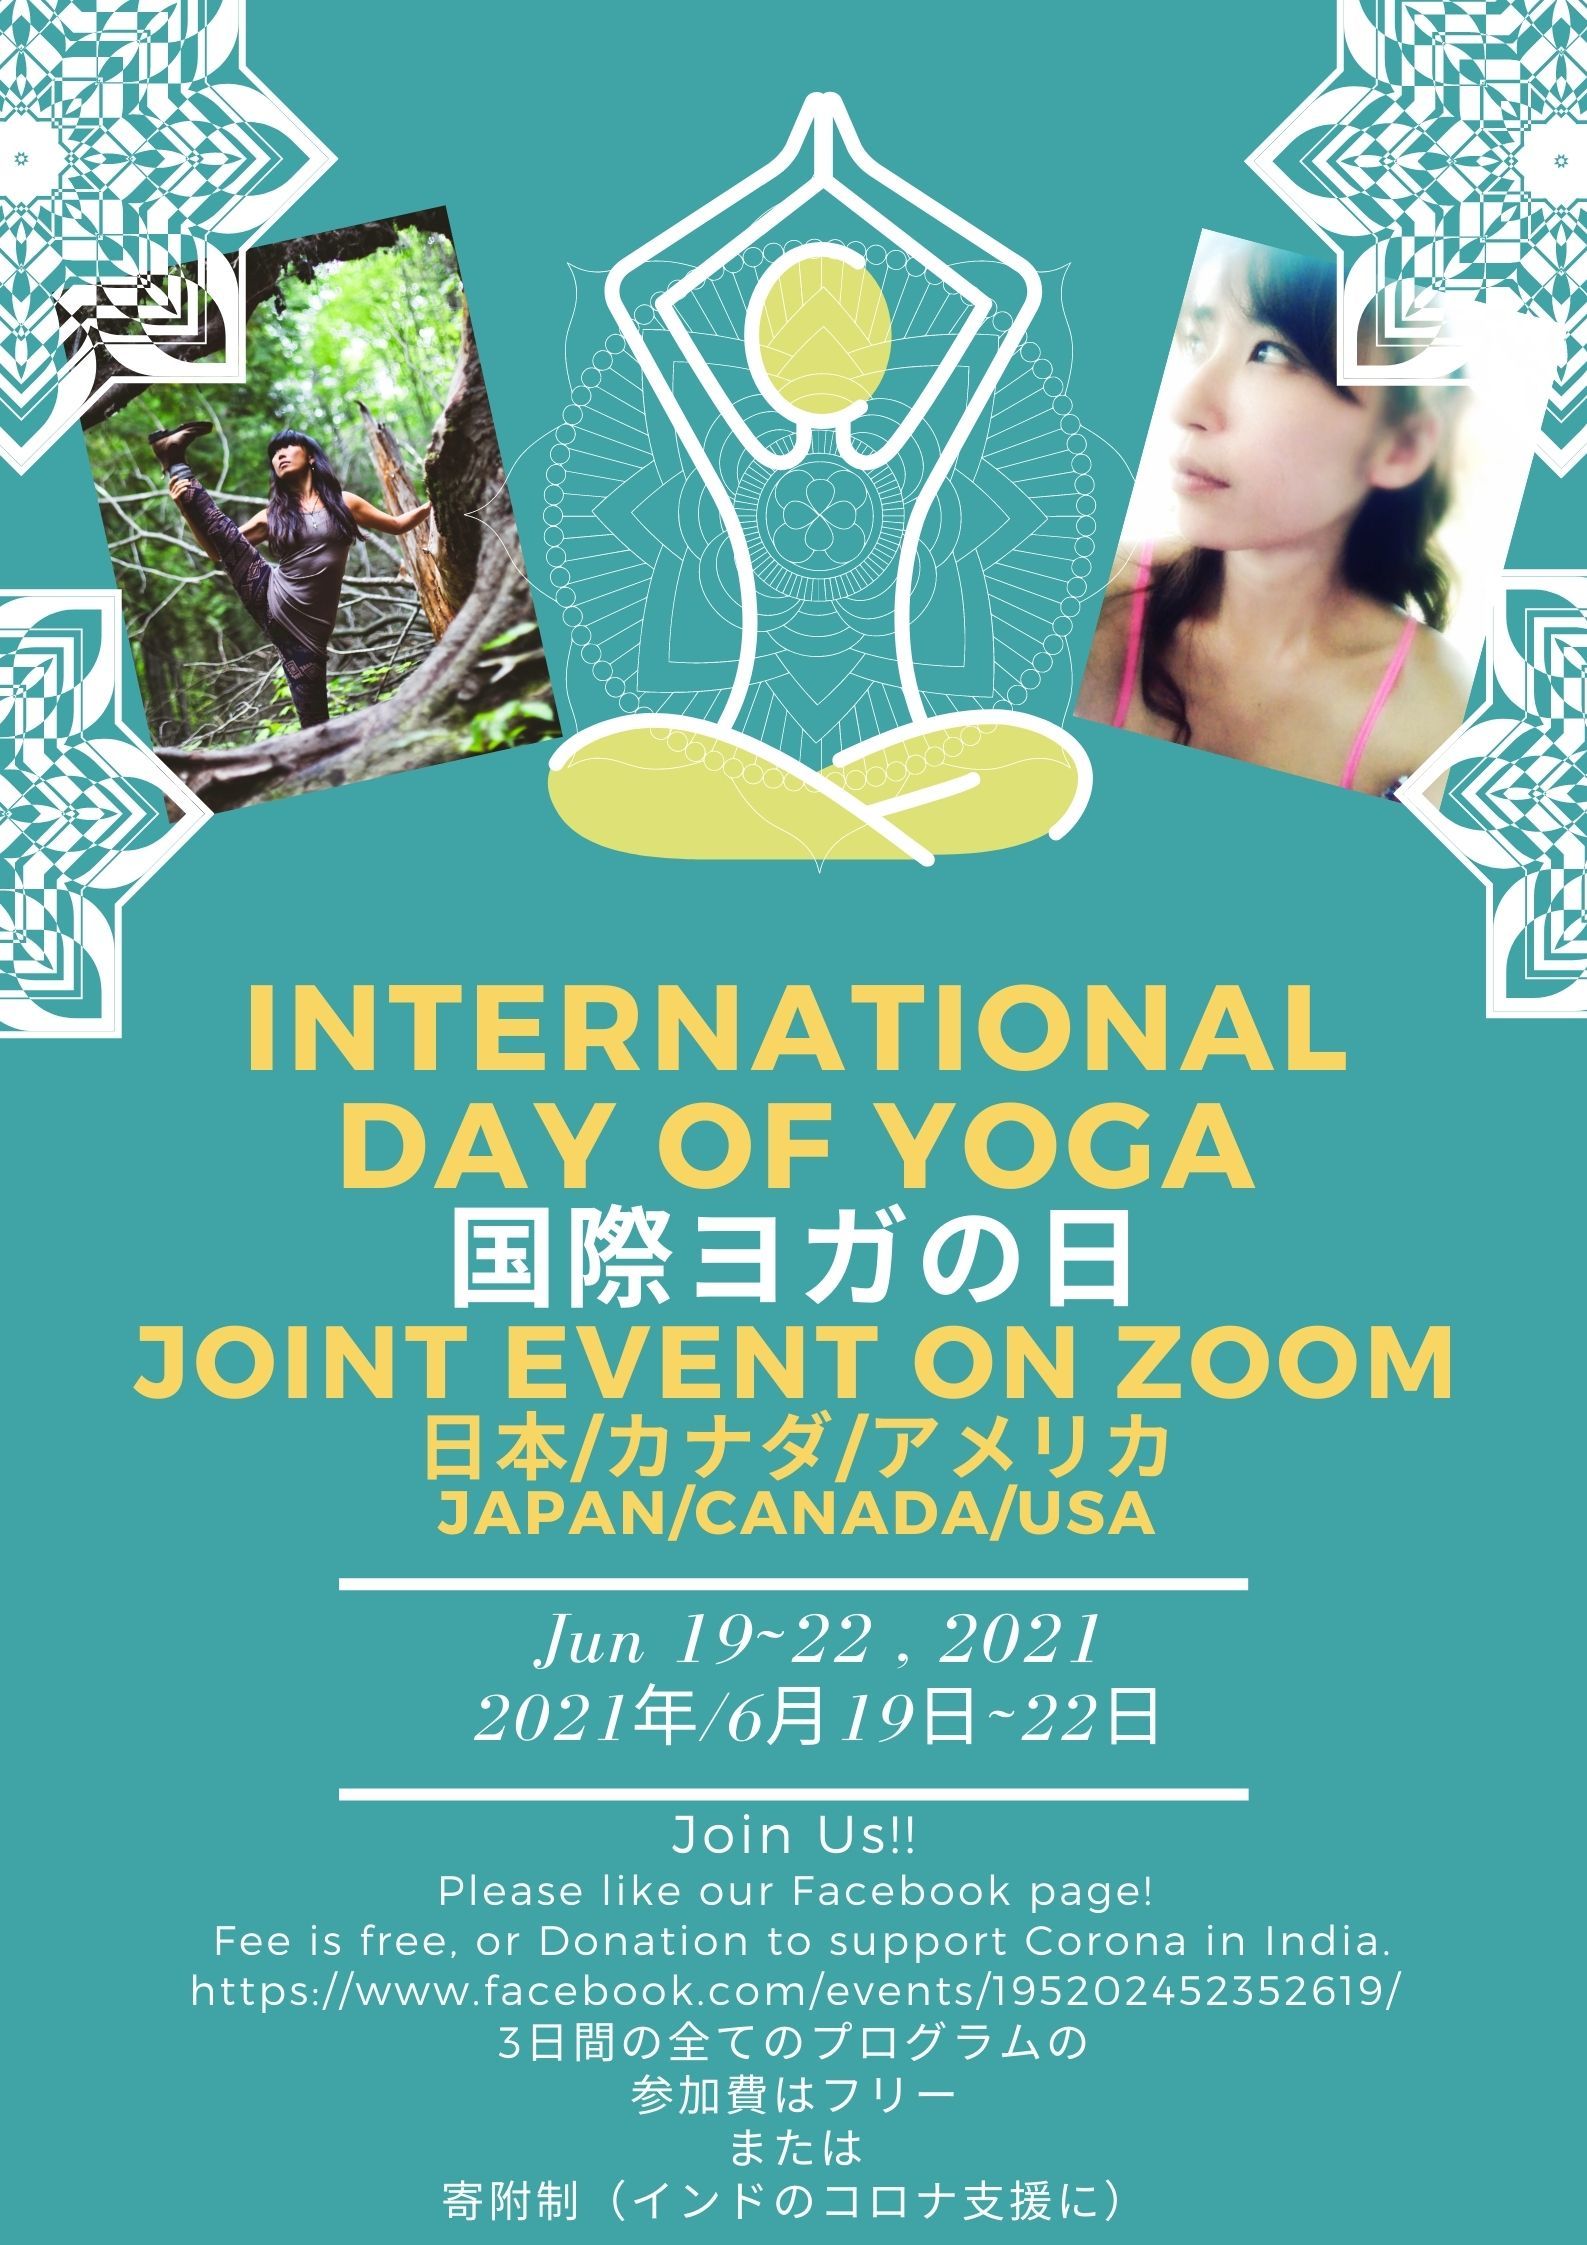 International Day of Yoga Joint even 国際ヨガの日 日本カナダアメリカ